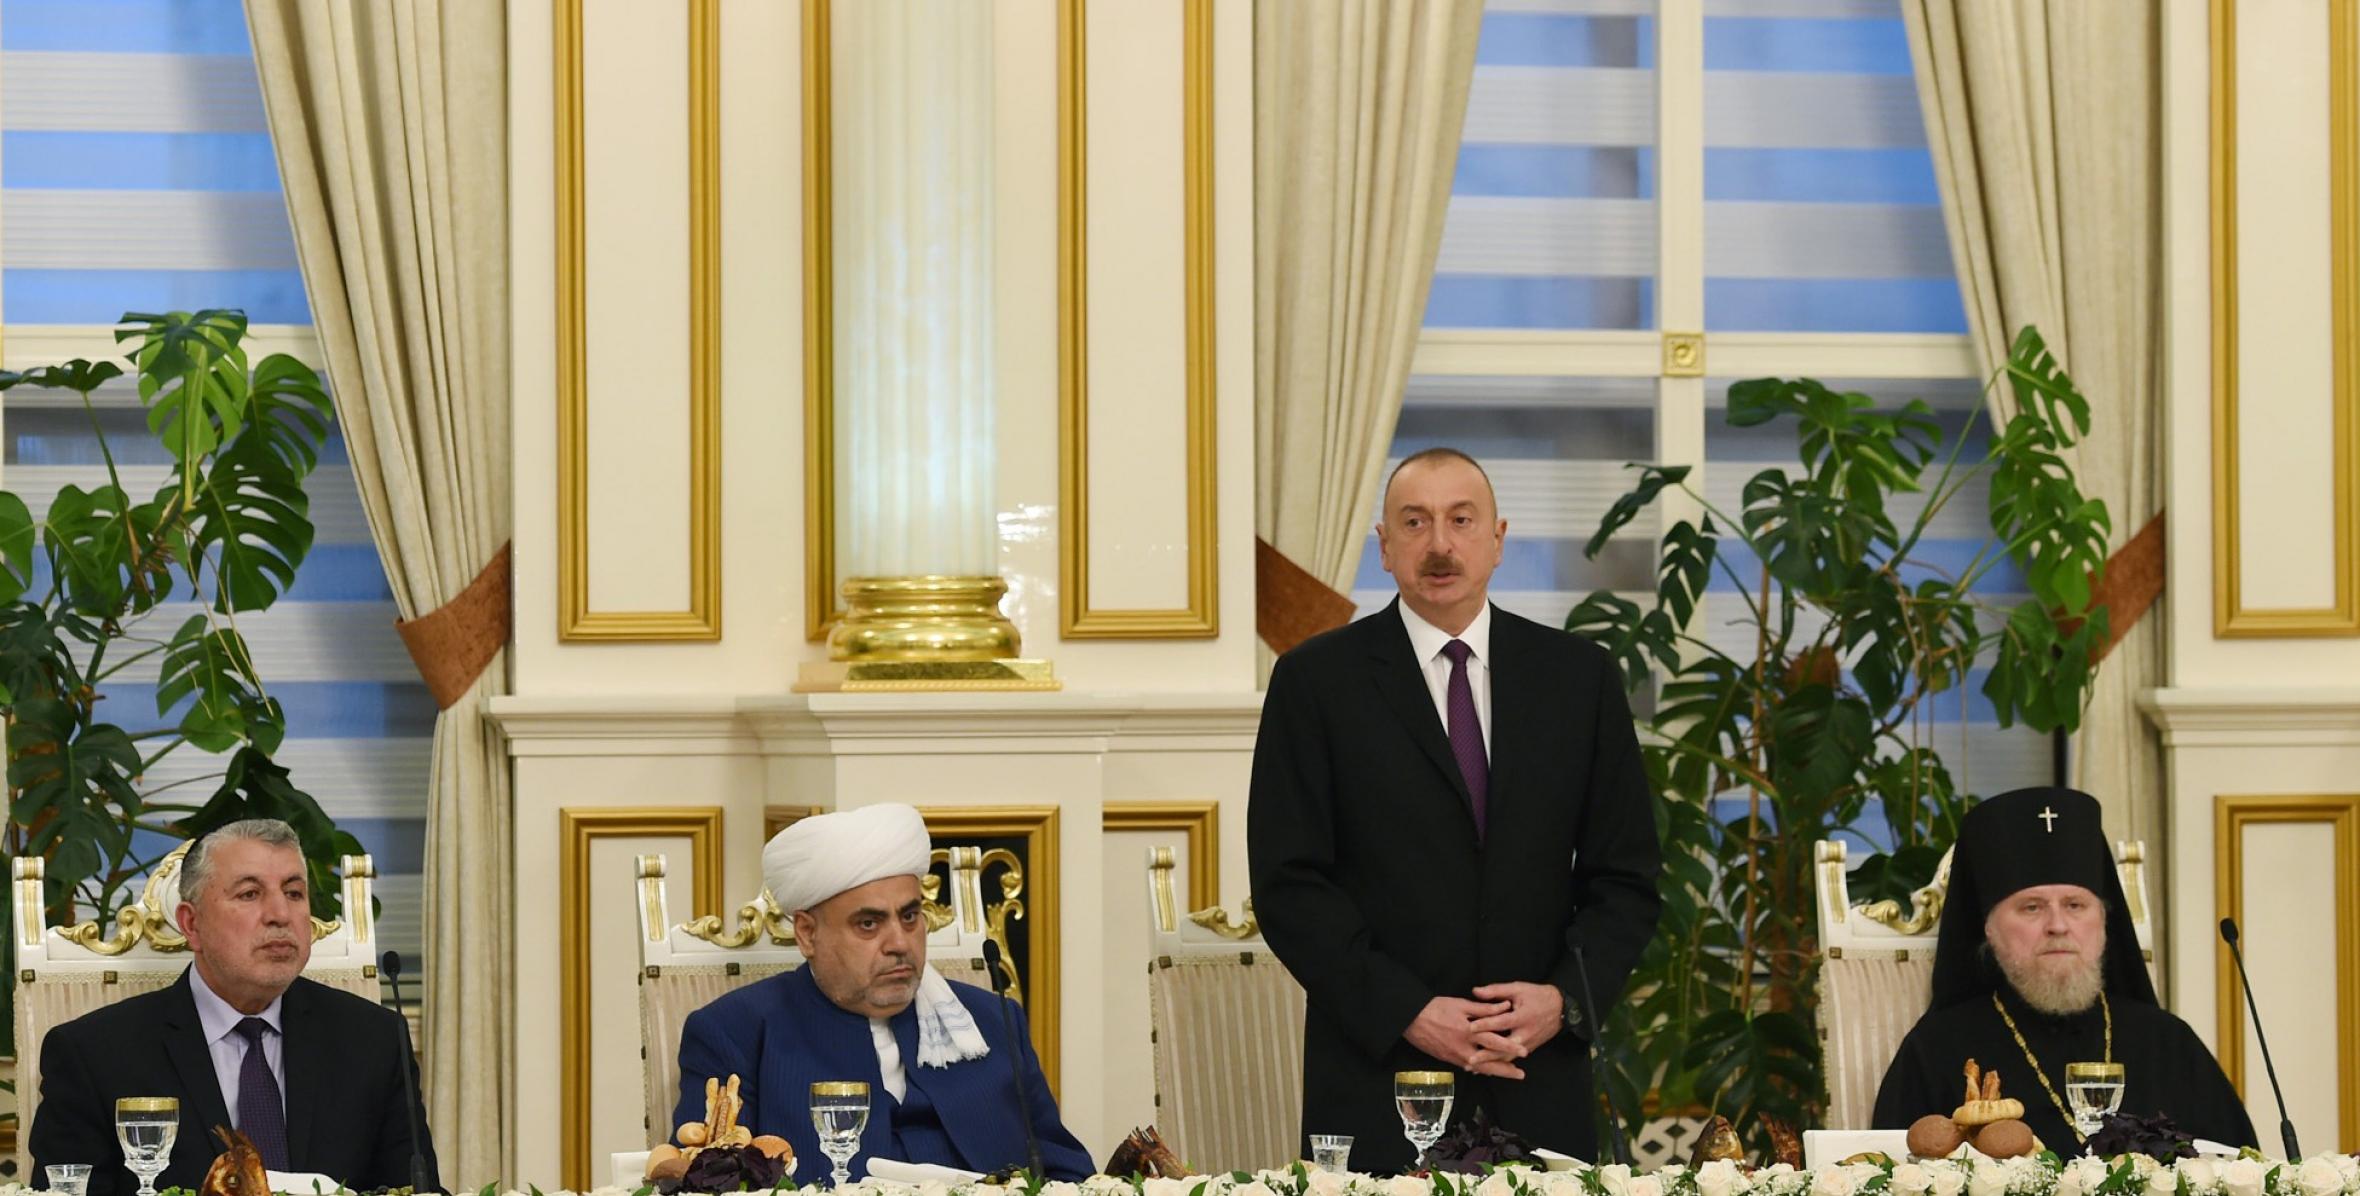 Speech by Ilham Aliyev at the Iftar ceremony on the occasion of holy month of Ramadan